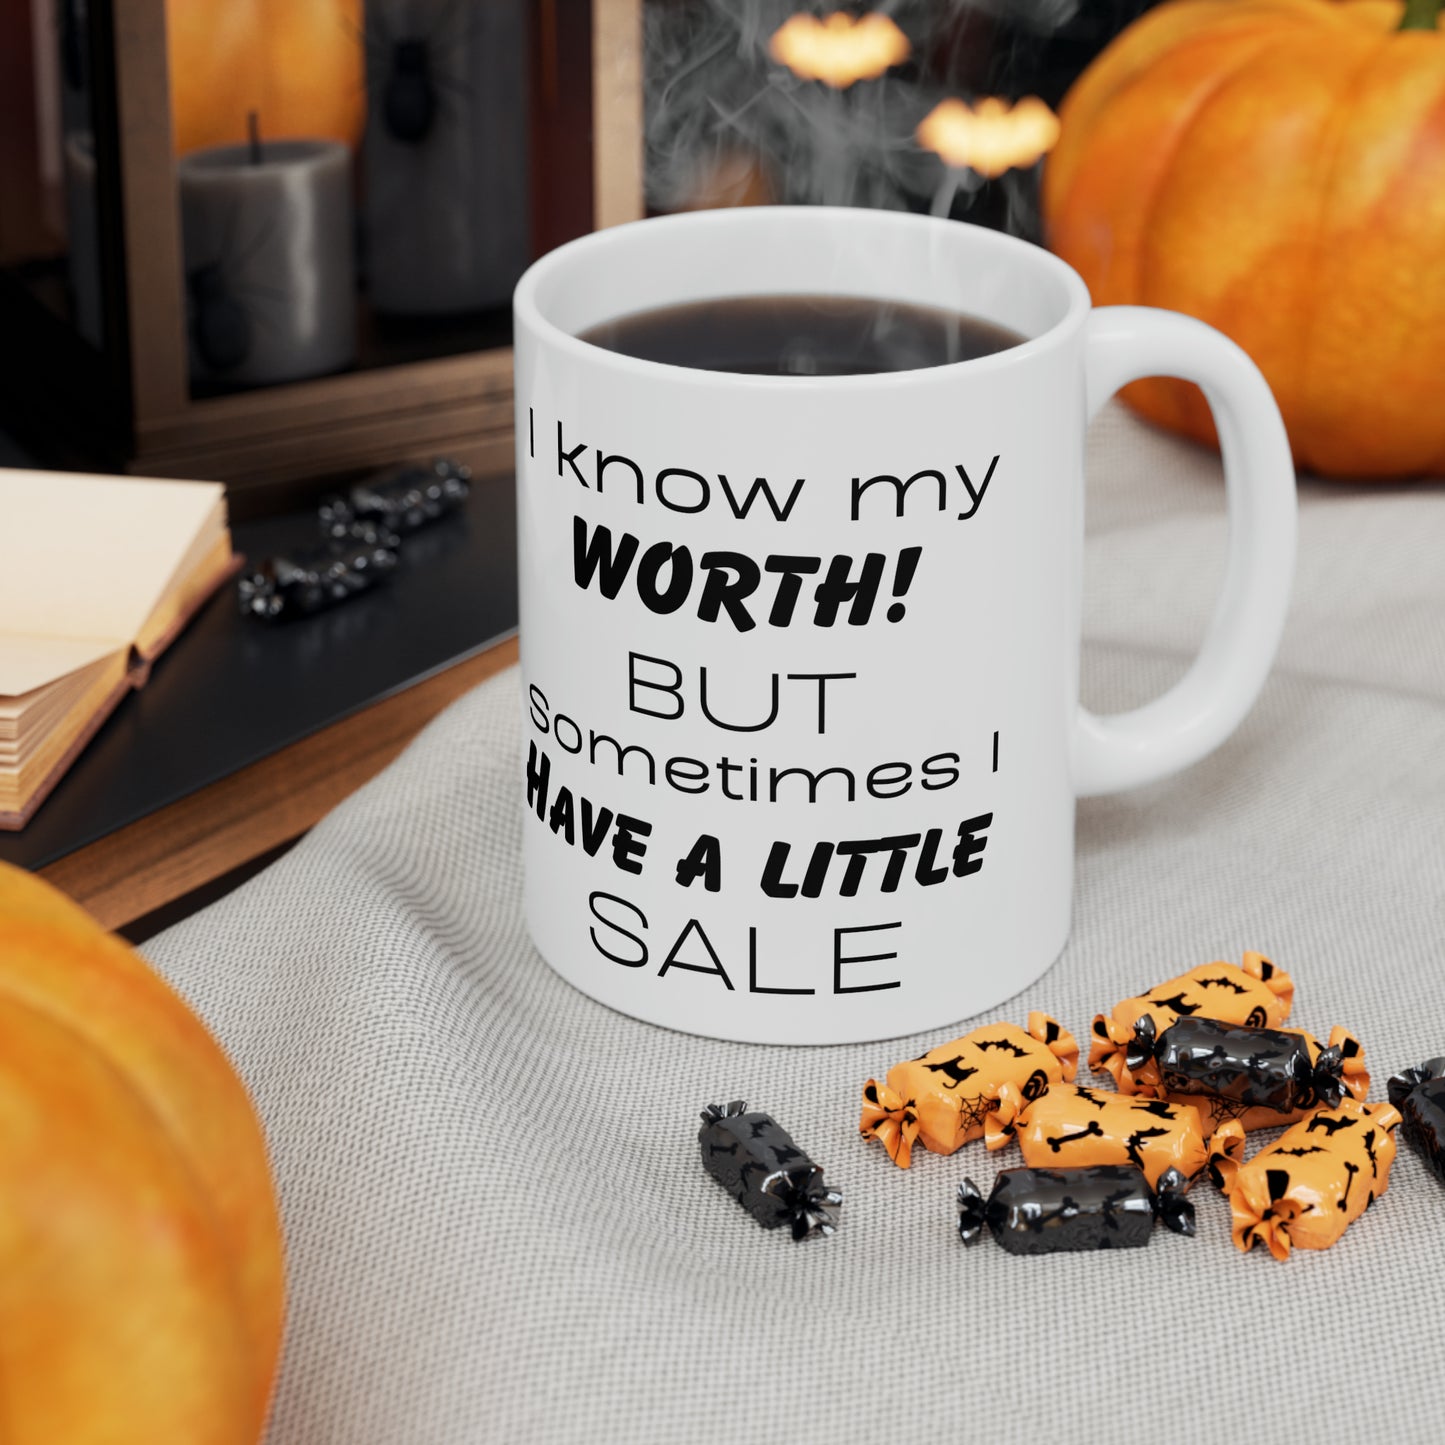 I know my worth, but sometimes I have a little sale! Ceramic Coffee Cups, 11oz, 15oz